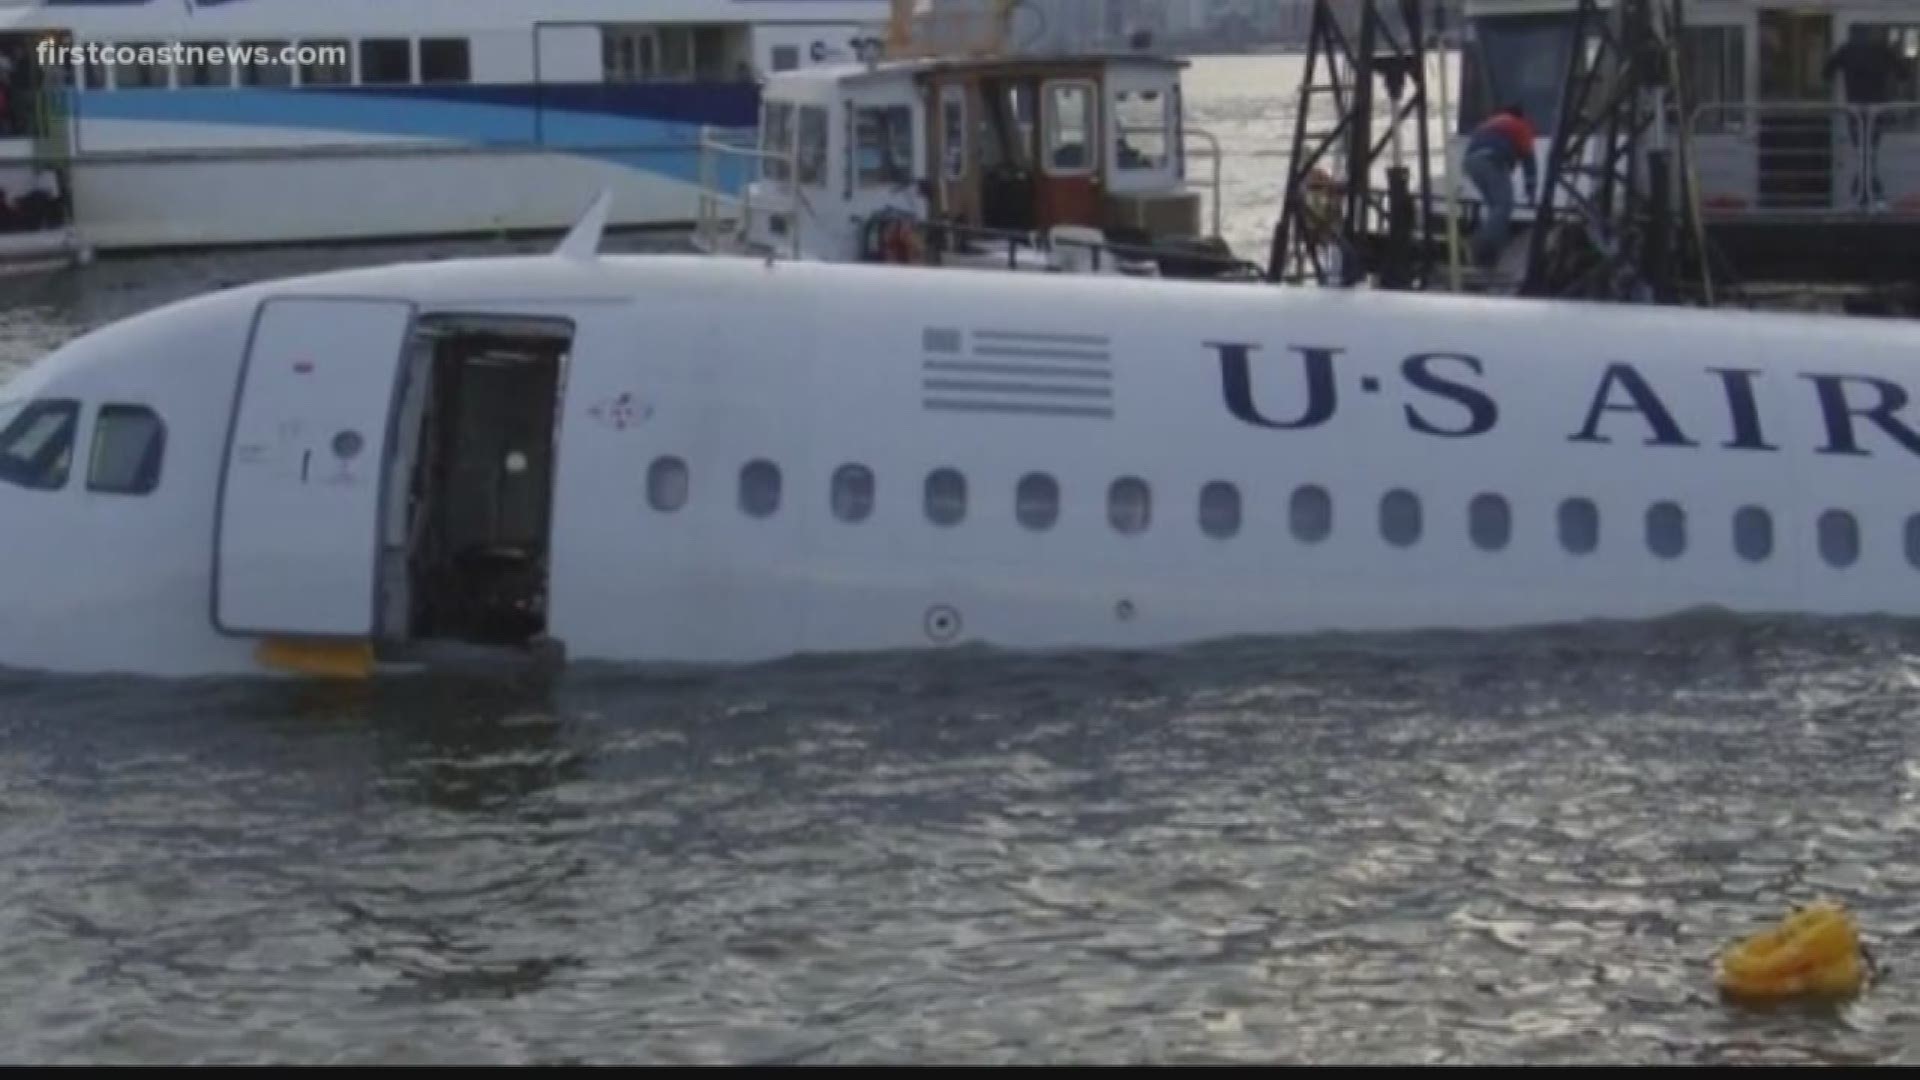 The recent plane crash at NAS JAX, dubbed by many overnight as the 'Miracle on the St Johns", brings many people back to the moment a plane landed on the Hudson River ten years ago.